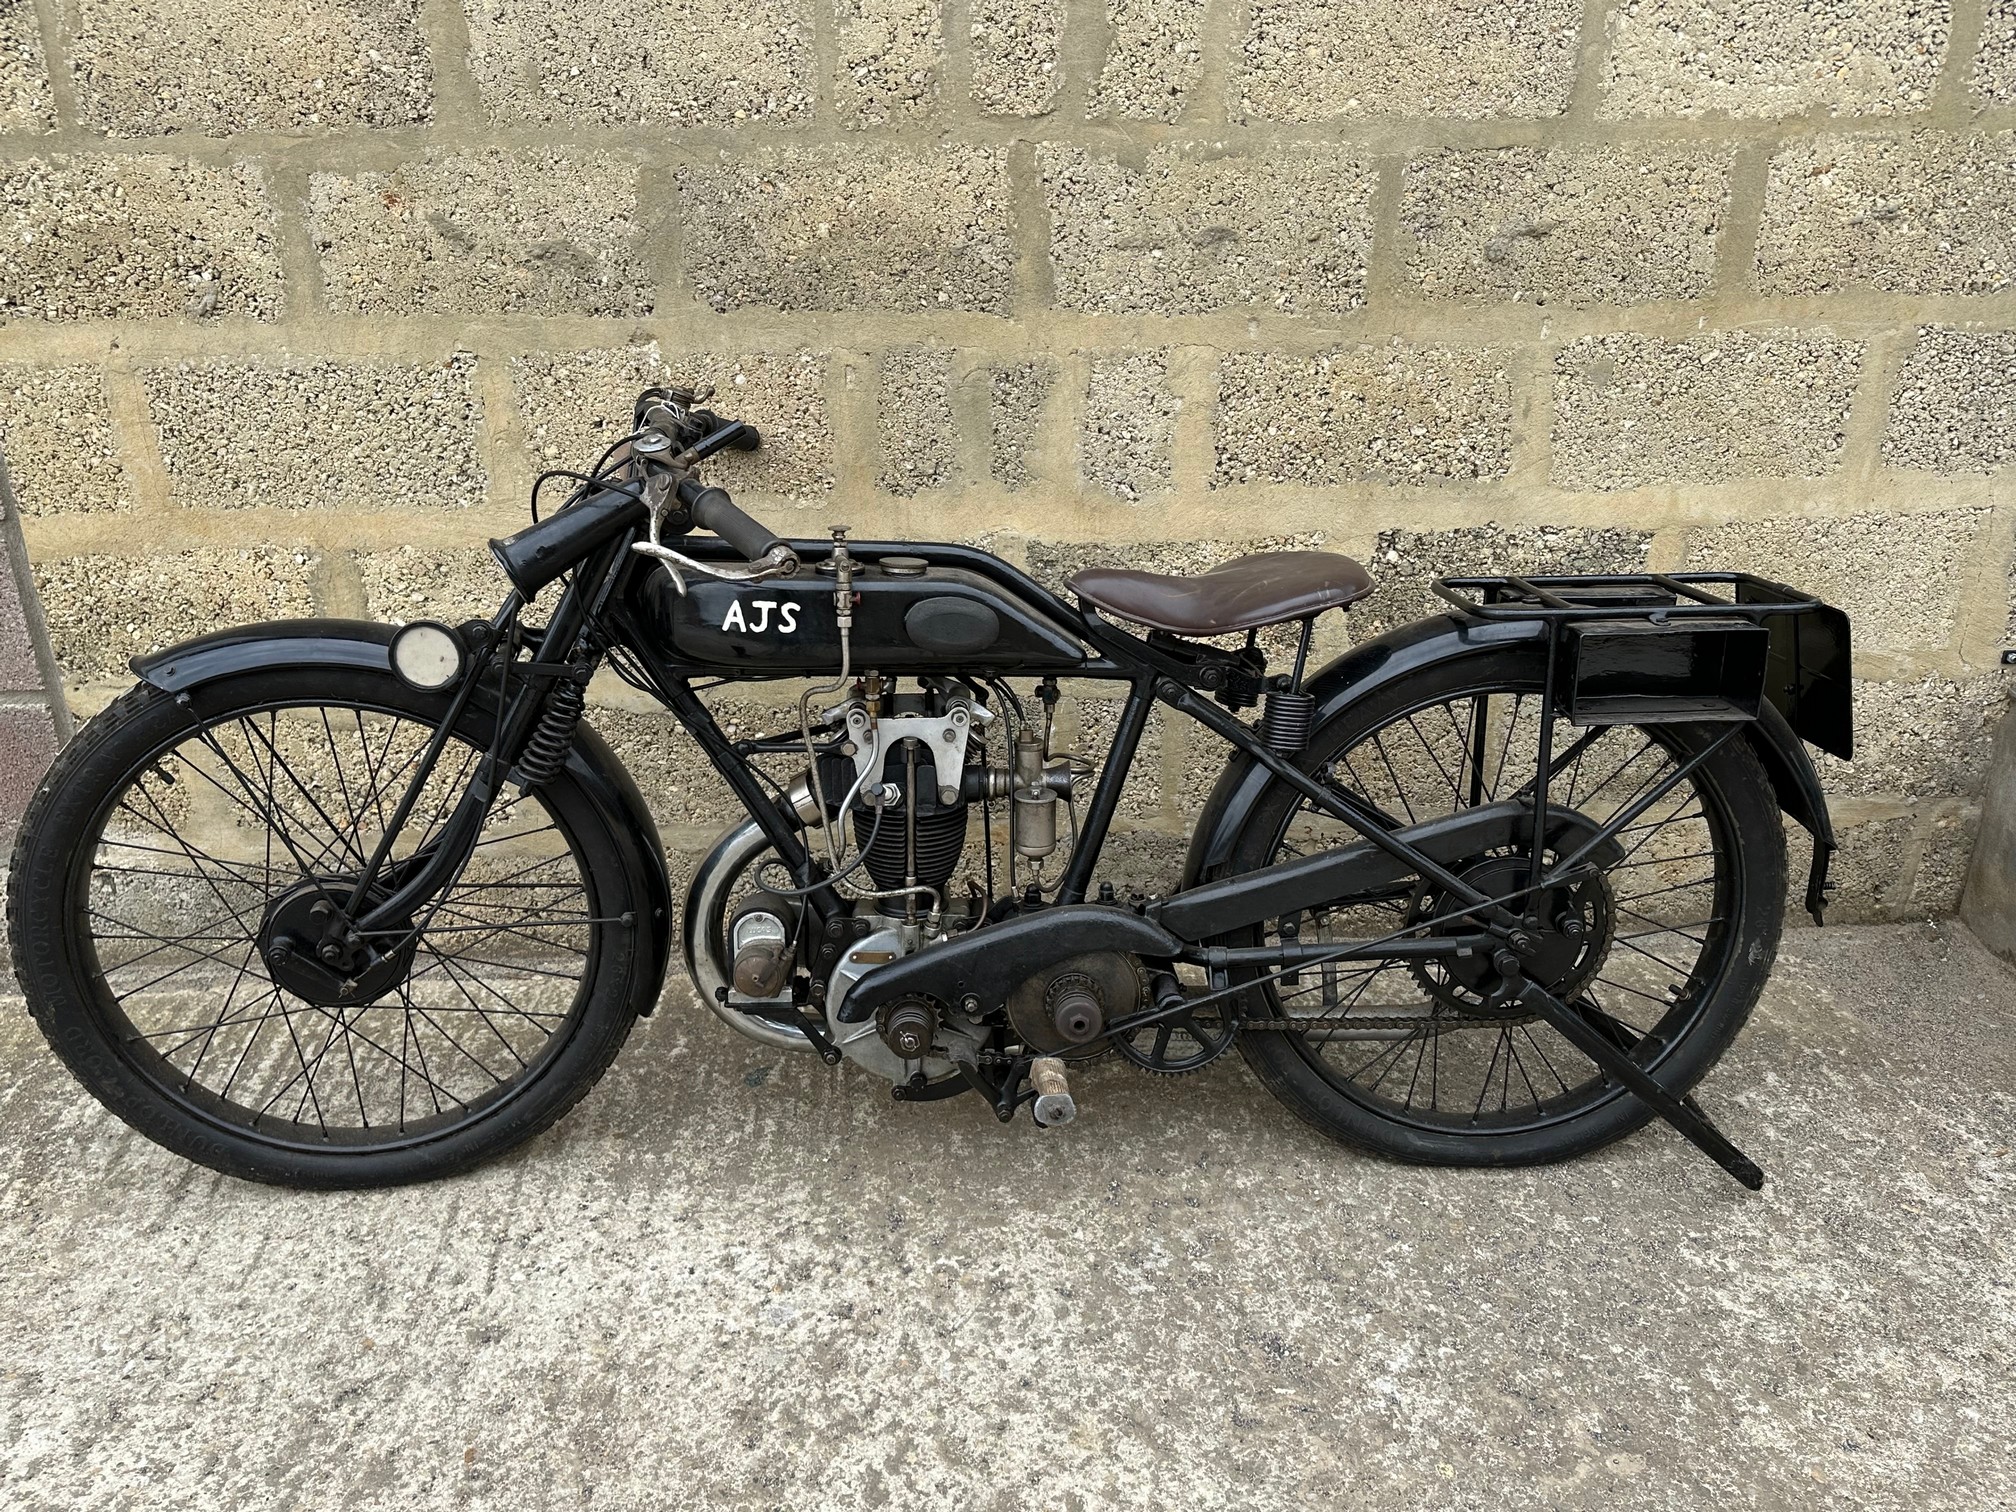 1925 AJS 350 SV MODEL E5 2 3/4hp STANDARD SPORTING MODEL FITTED WITH 1927 349cc OHV BIG PORT ENGINE - Image 2 of 13